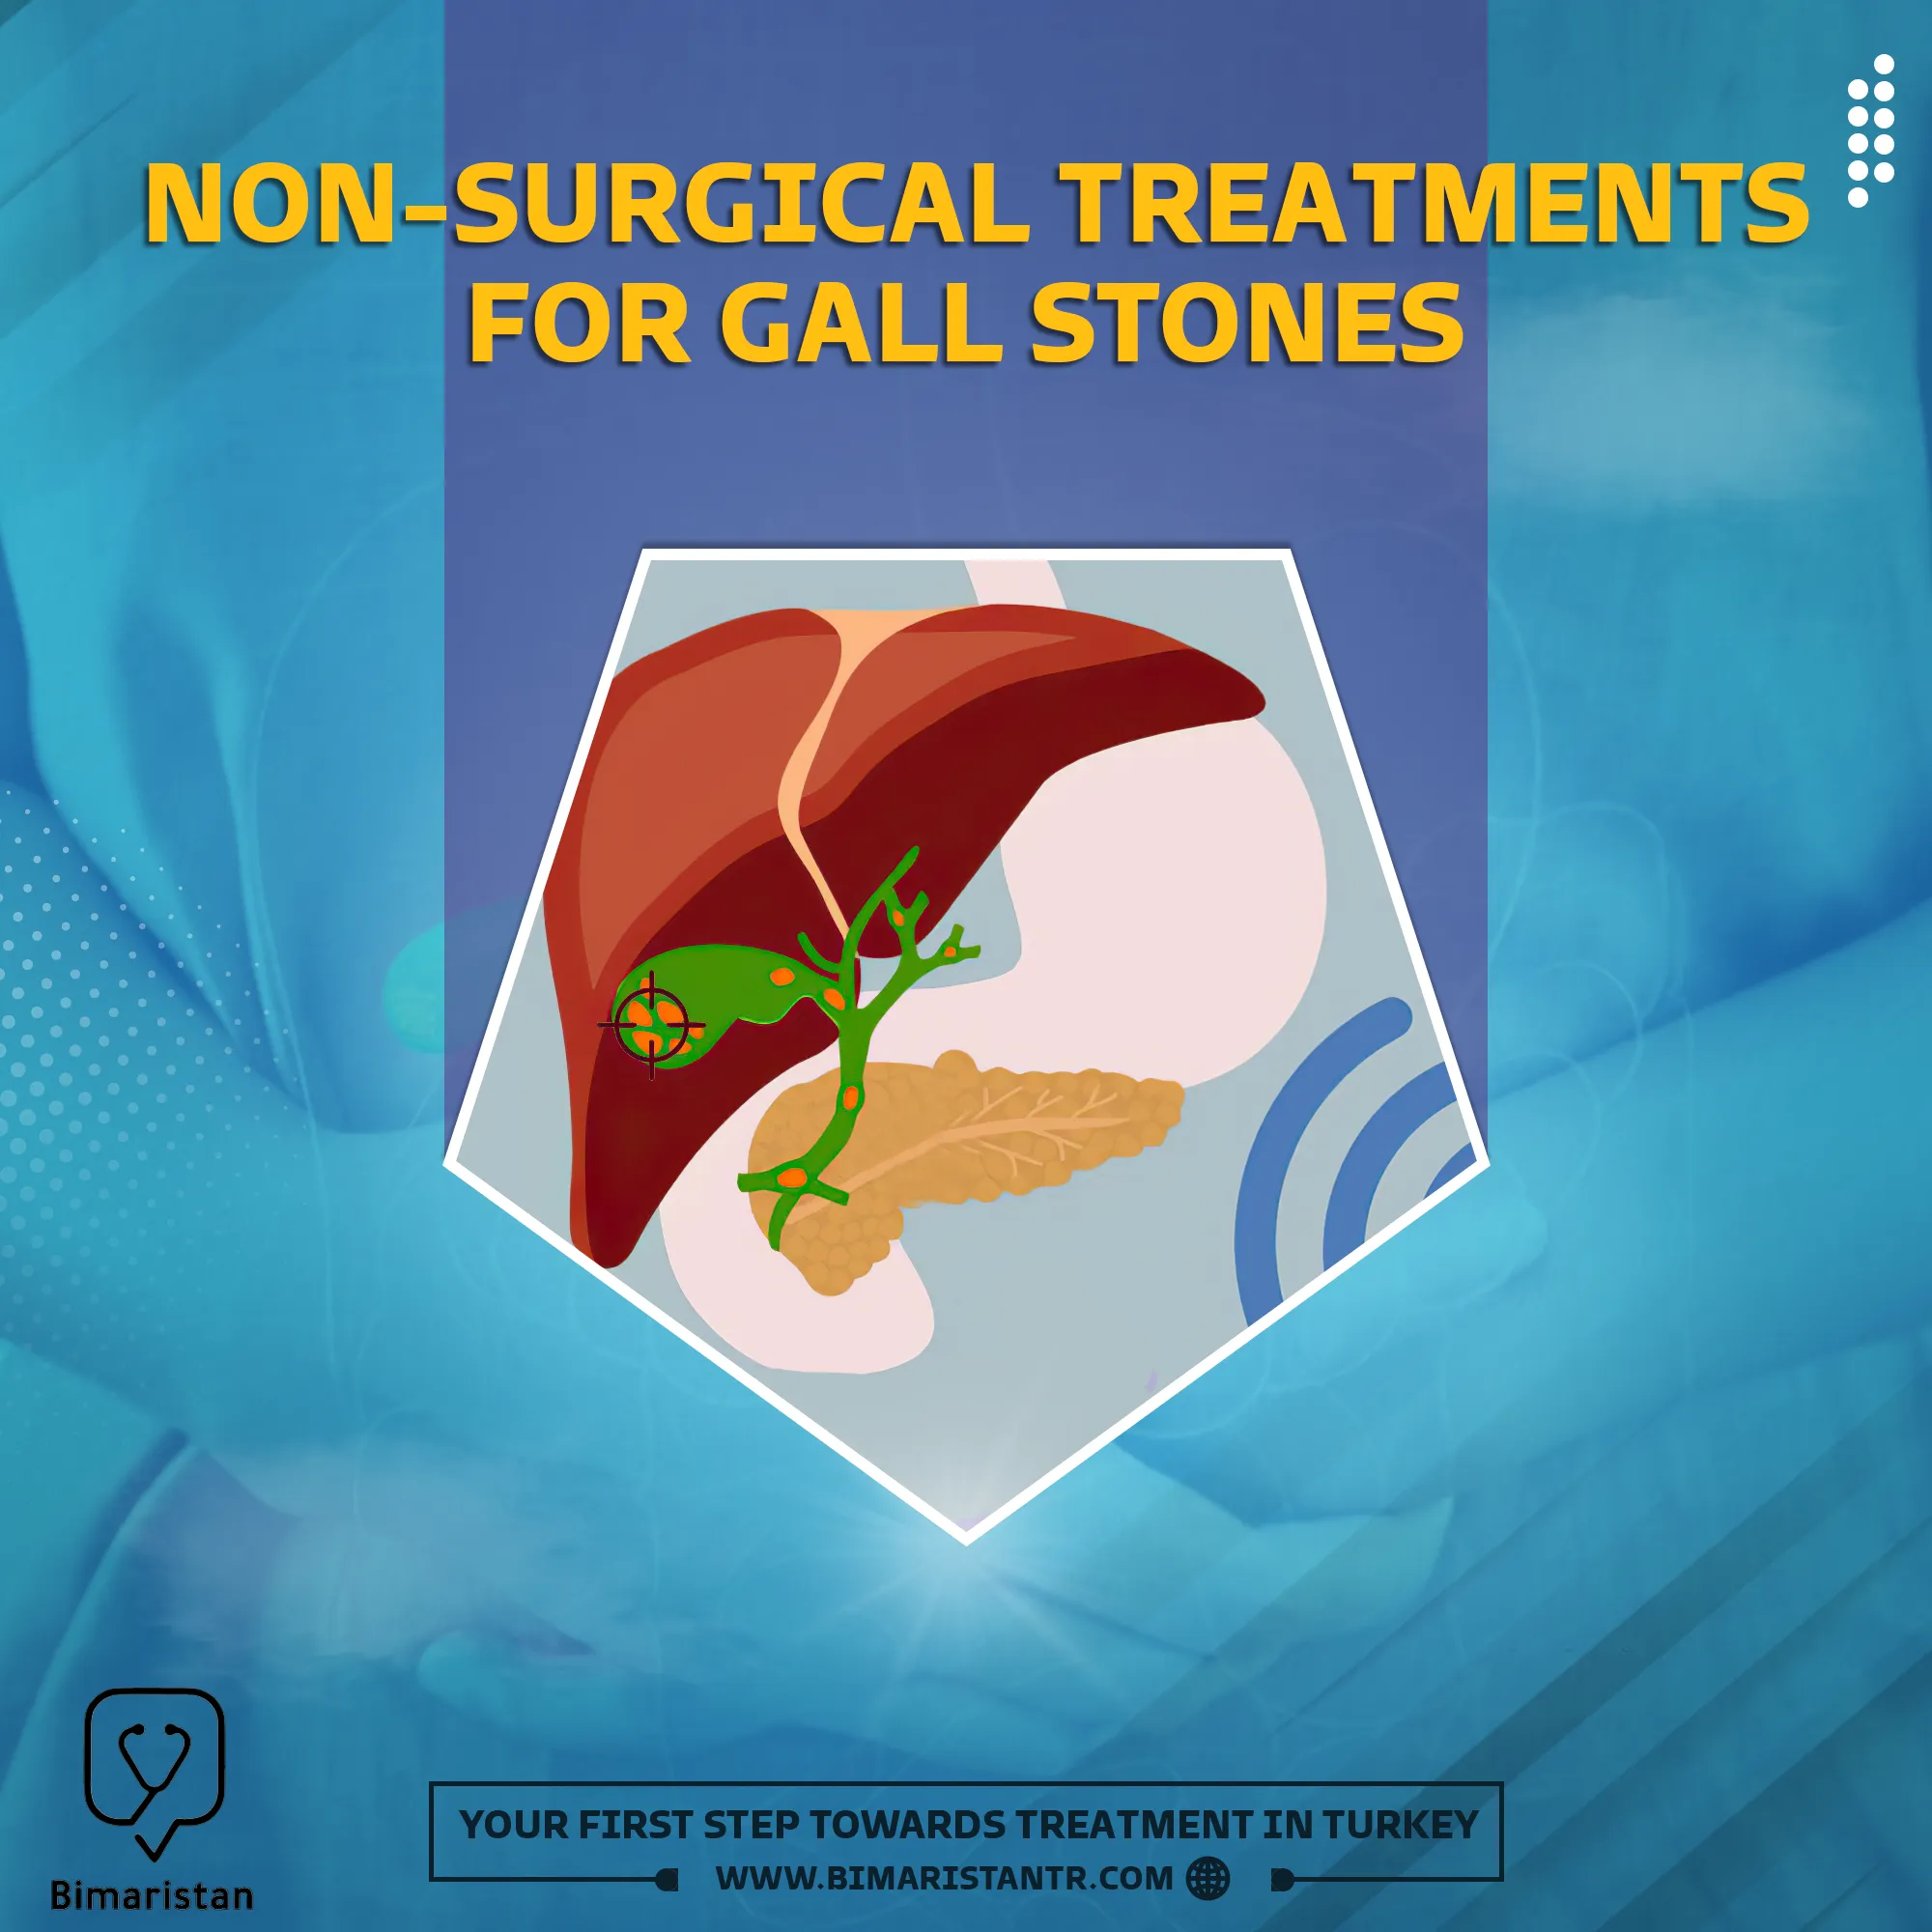 How to break up gallstones without surgery?